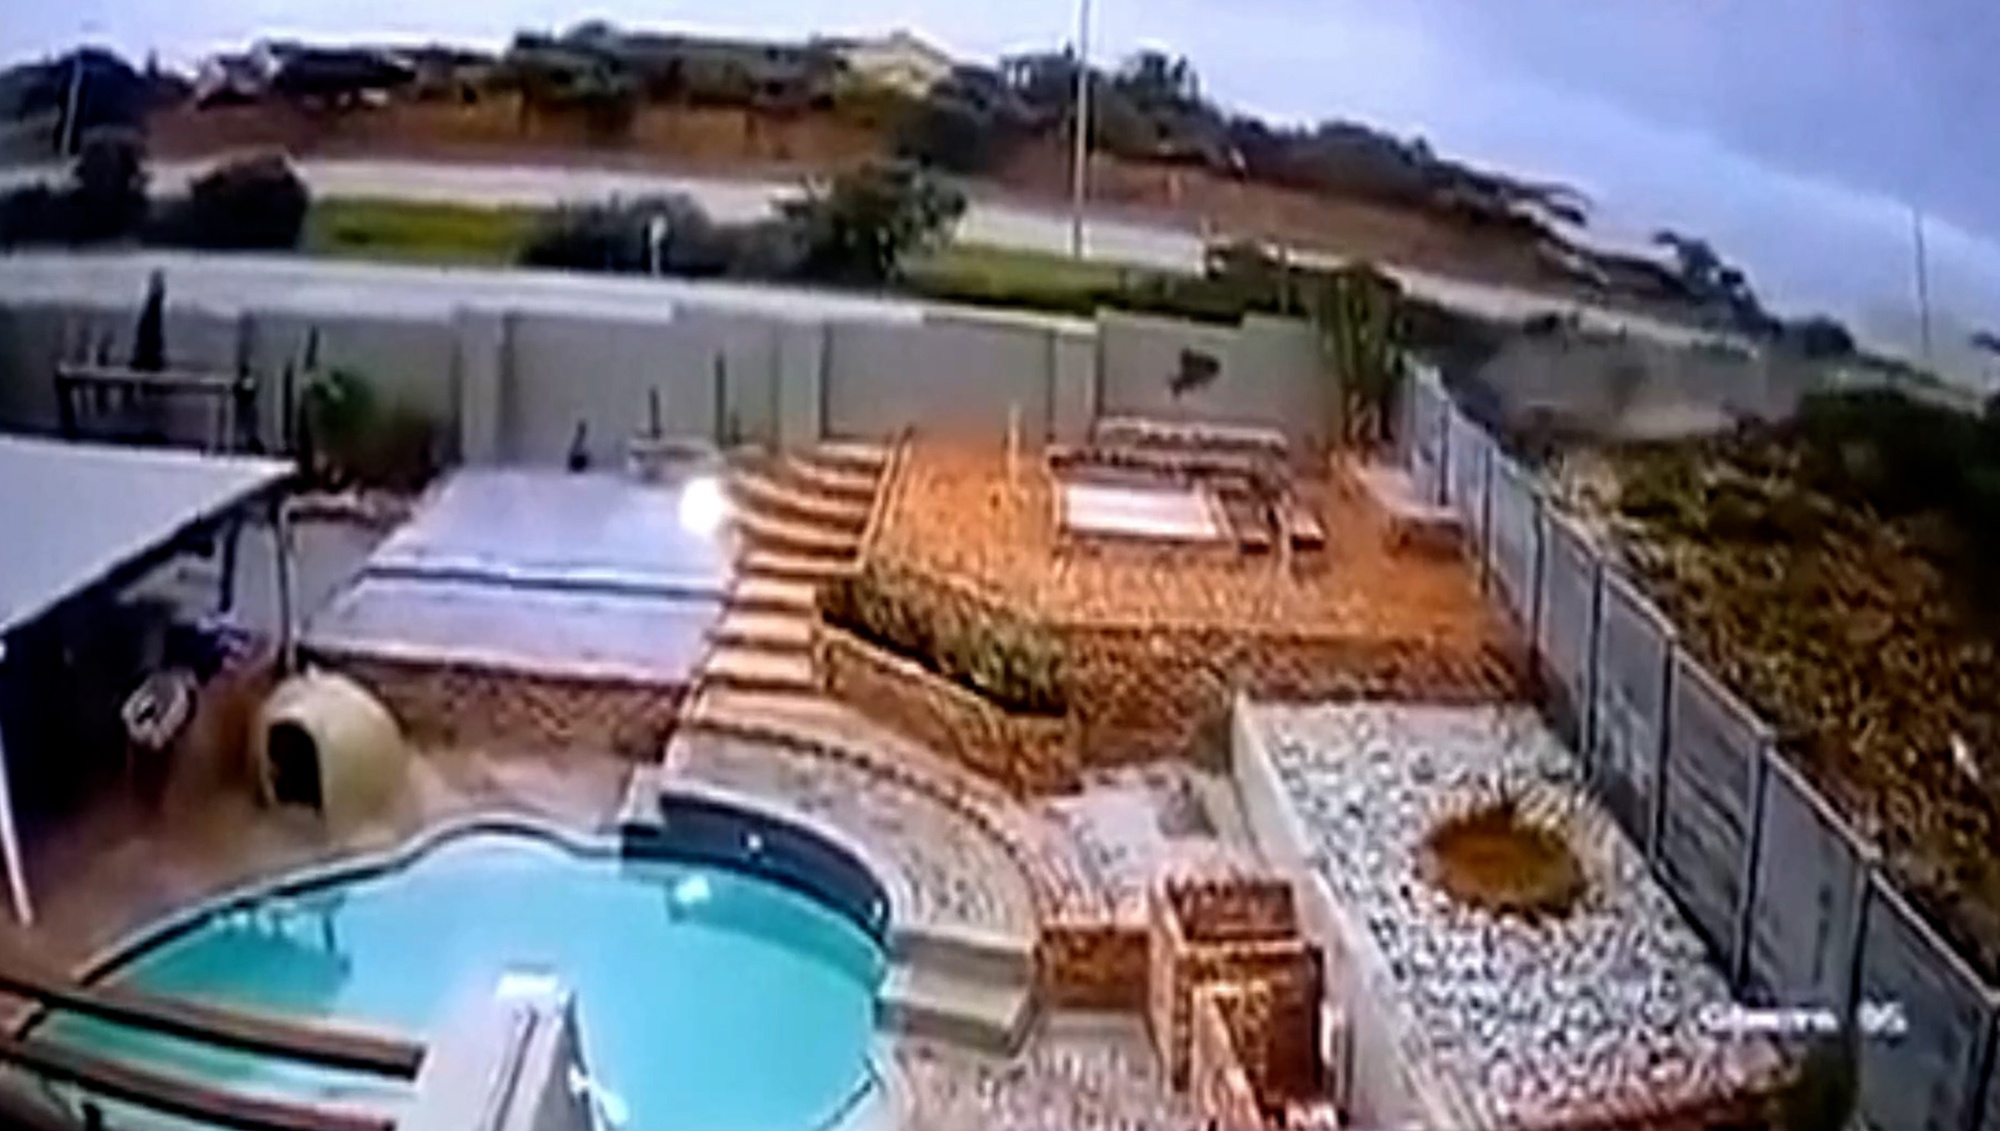 Read more about the article WATER SOFTNER: Car Crash Driver Flies Out Of Window And Lands In Swimming Pool